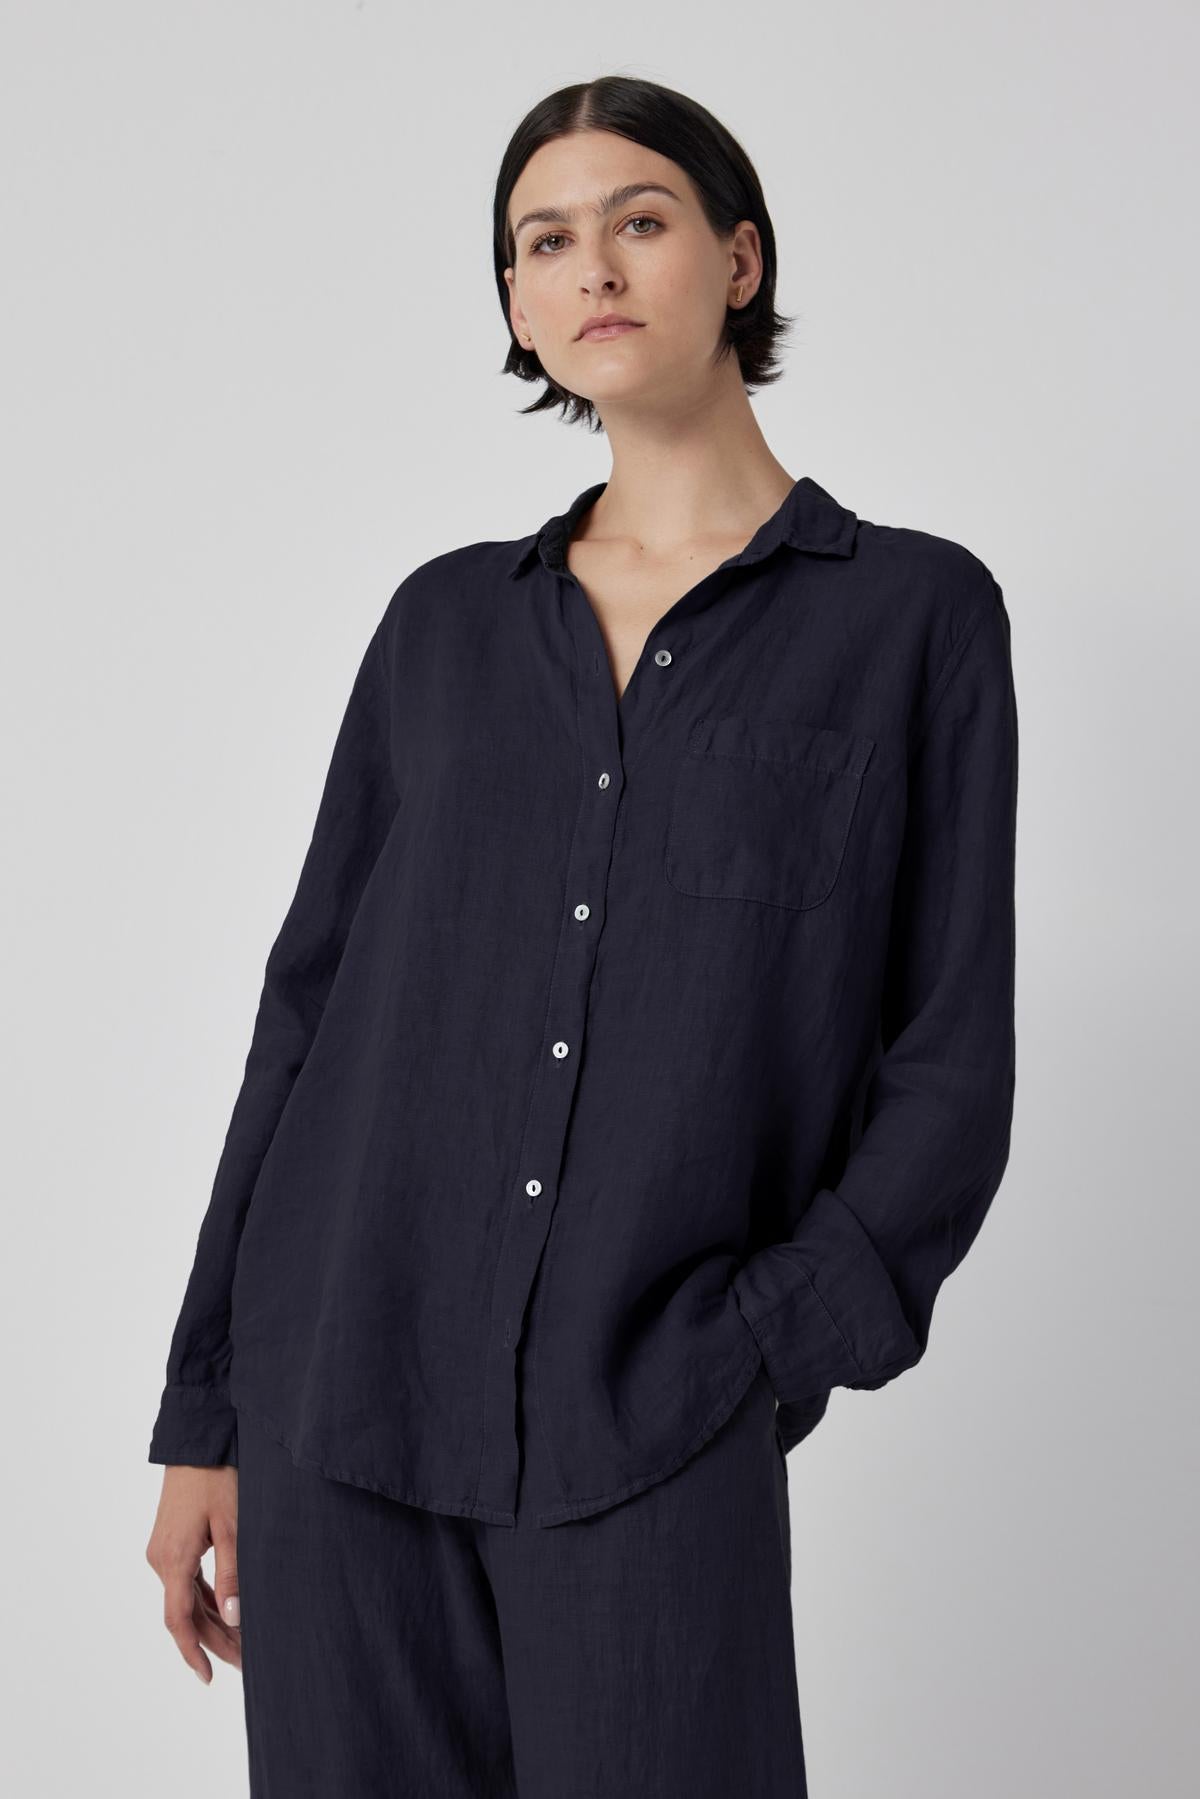 The model is wearing a navy linen MULHOLLAND SHIRT by Velvet by Jenny Graham and pants.-36198204014785